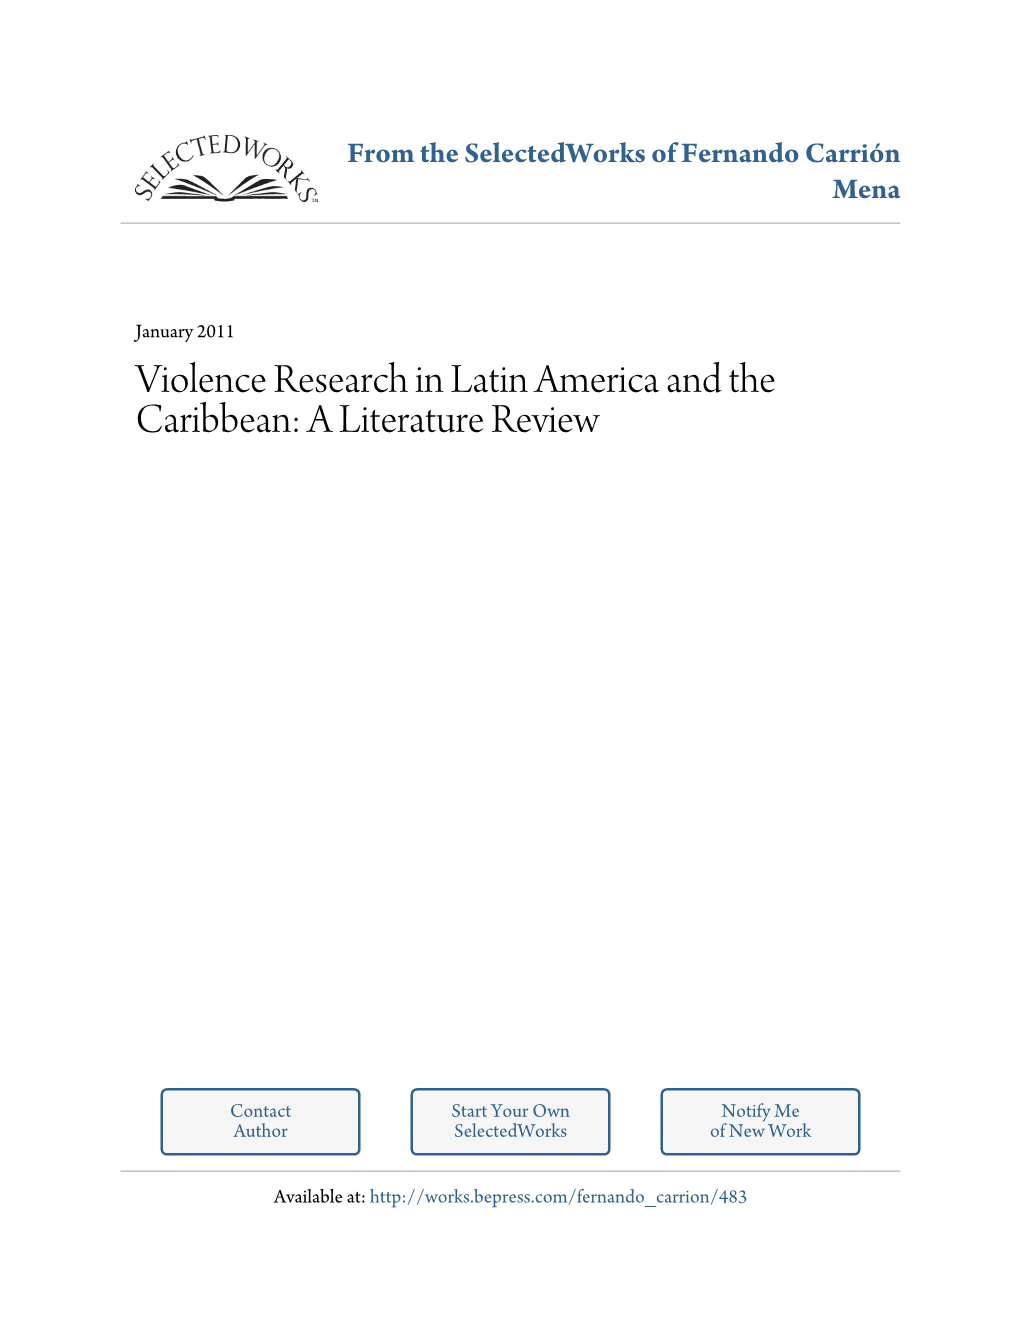 Violence Research in Latin America and the Caribbean: a Literature Review